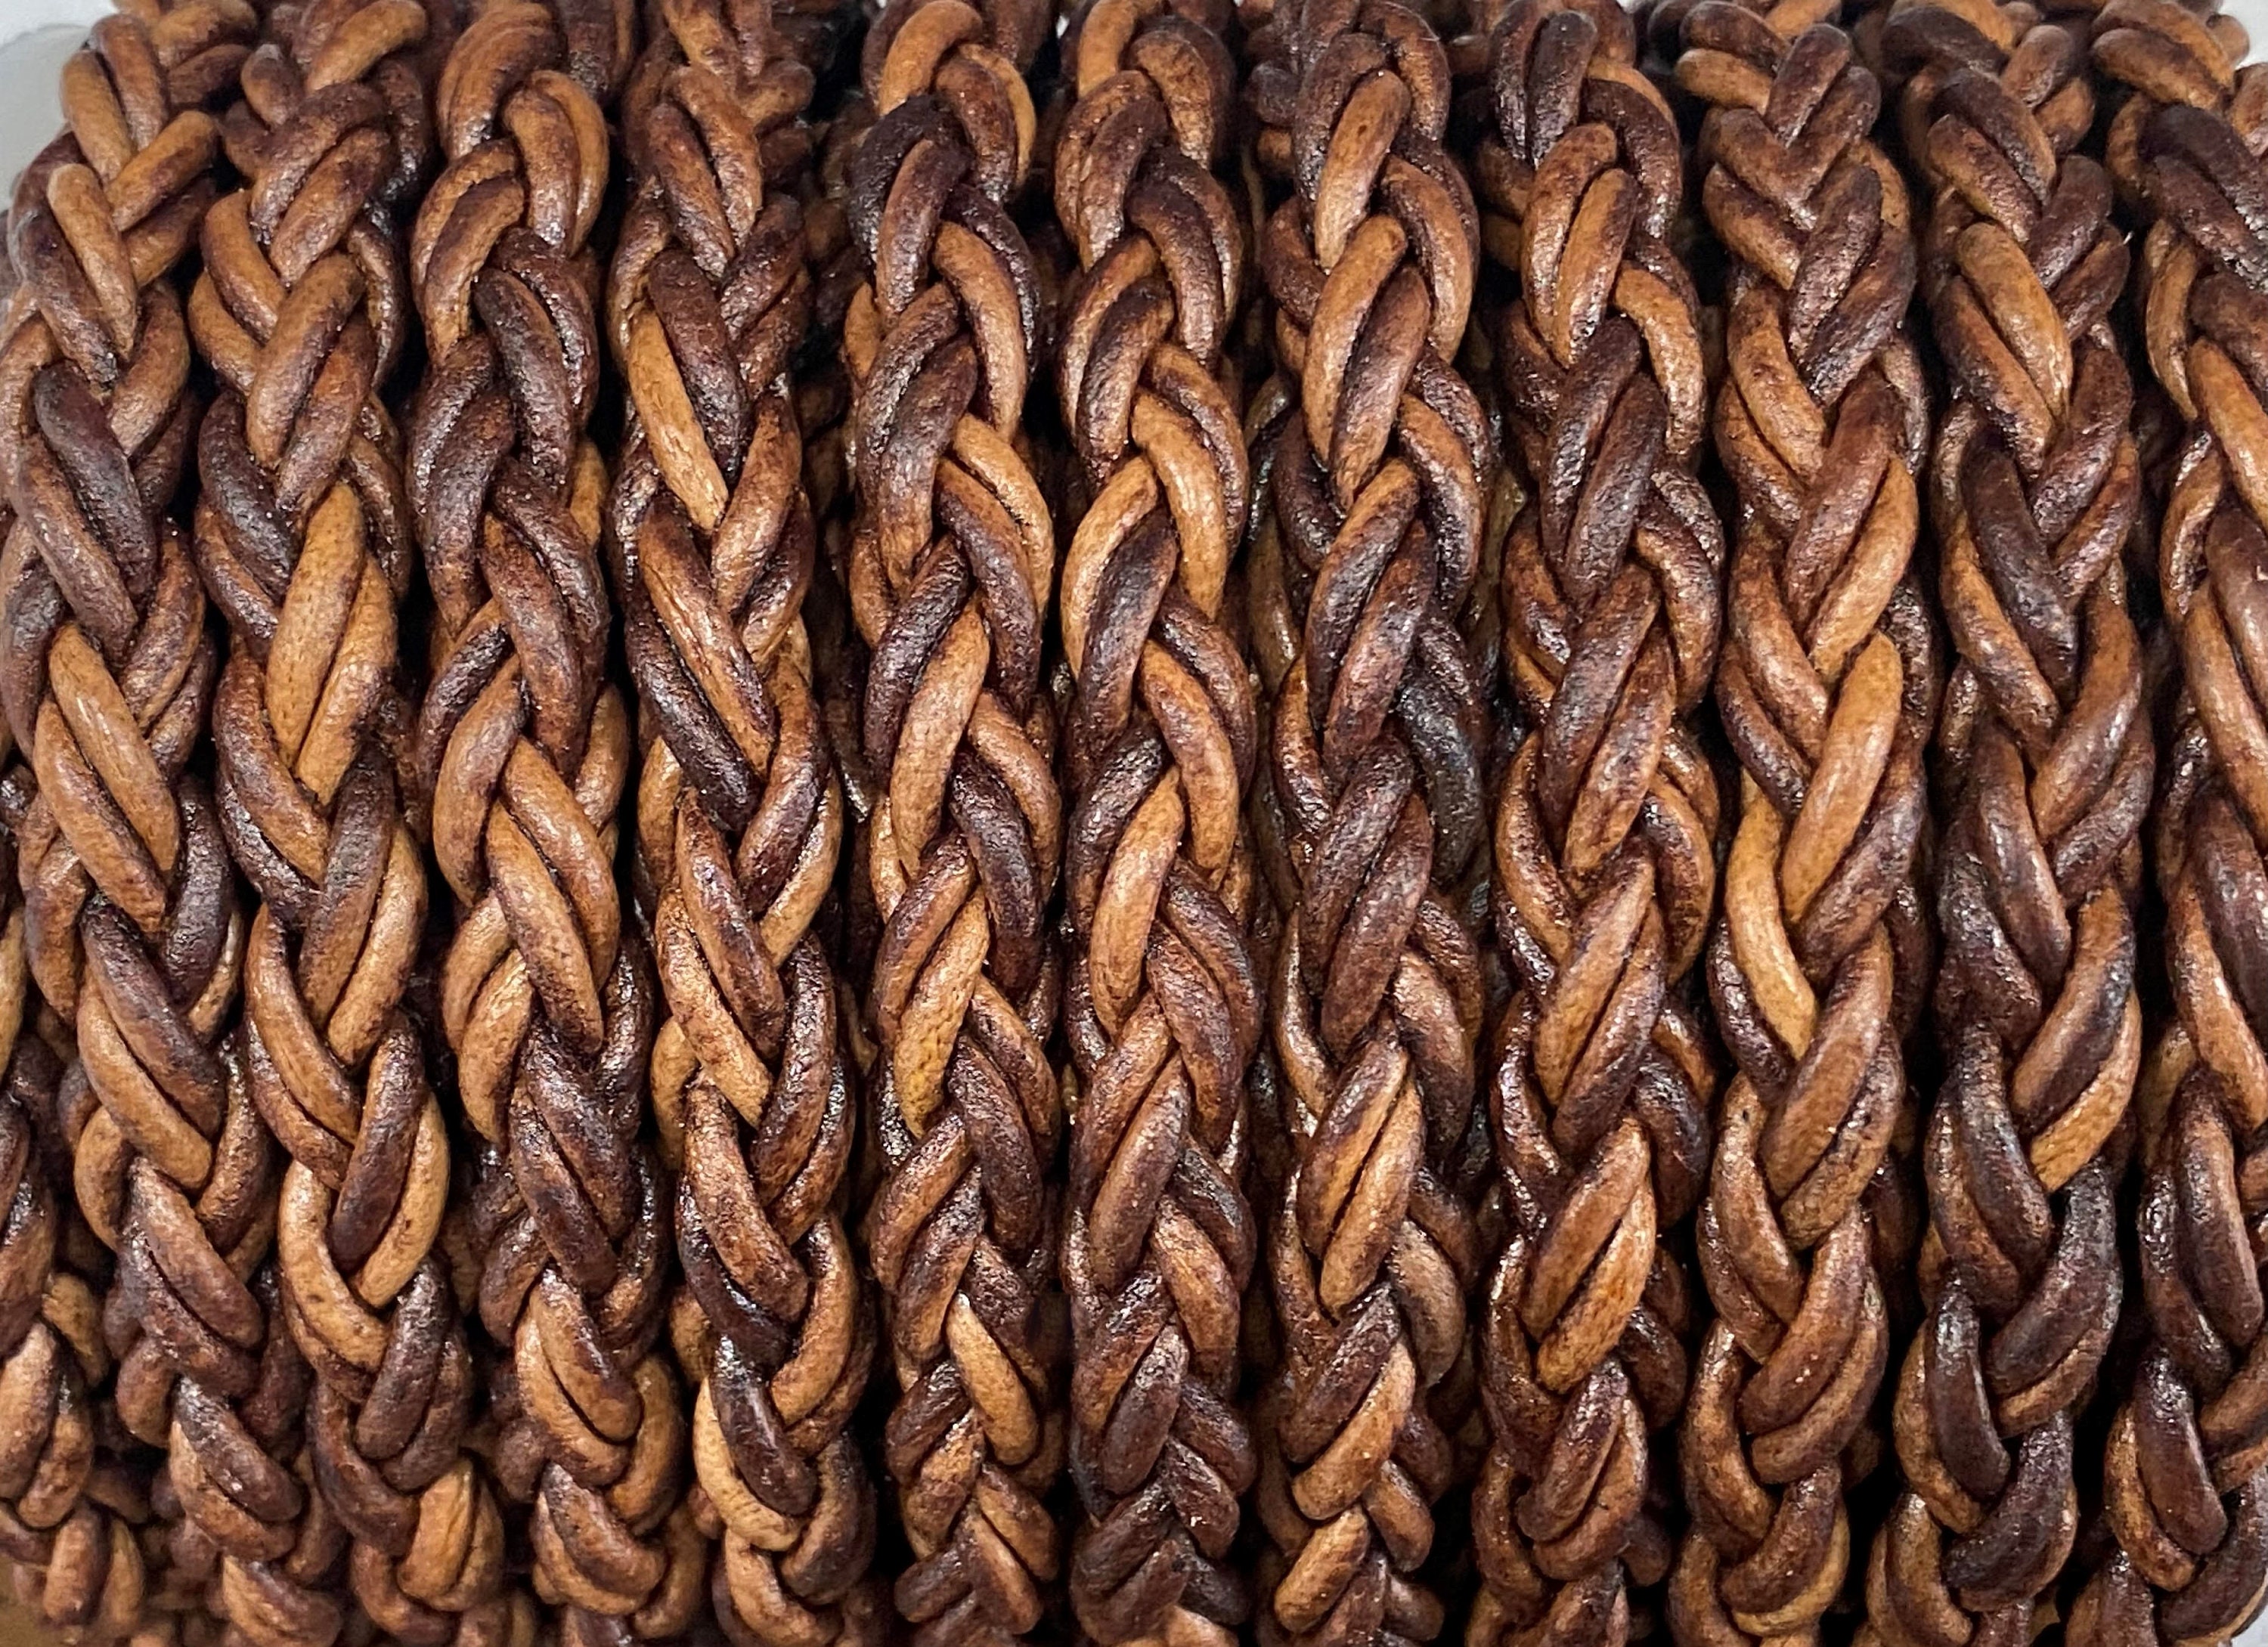 7.5mm Round Braided Leather Cord - English Brown - Natural Dye - 7.5mm Wide  - 8 Strand Braided Cord - 8 Ply By The Foot - English Brown